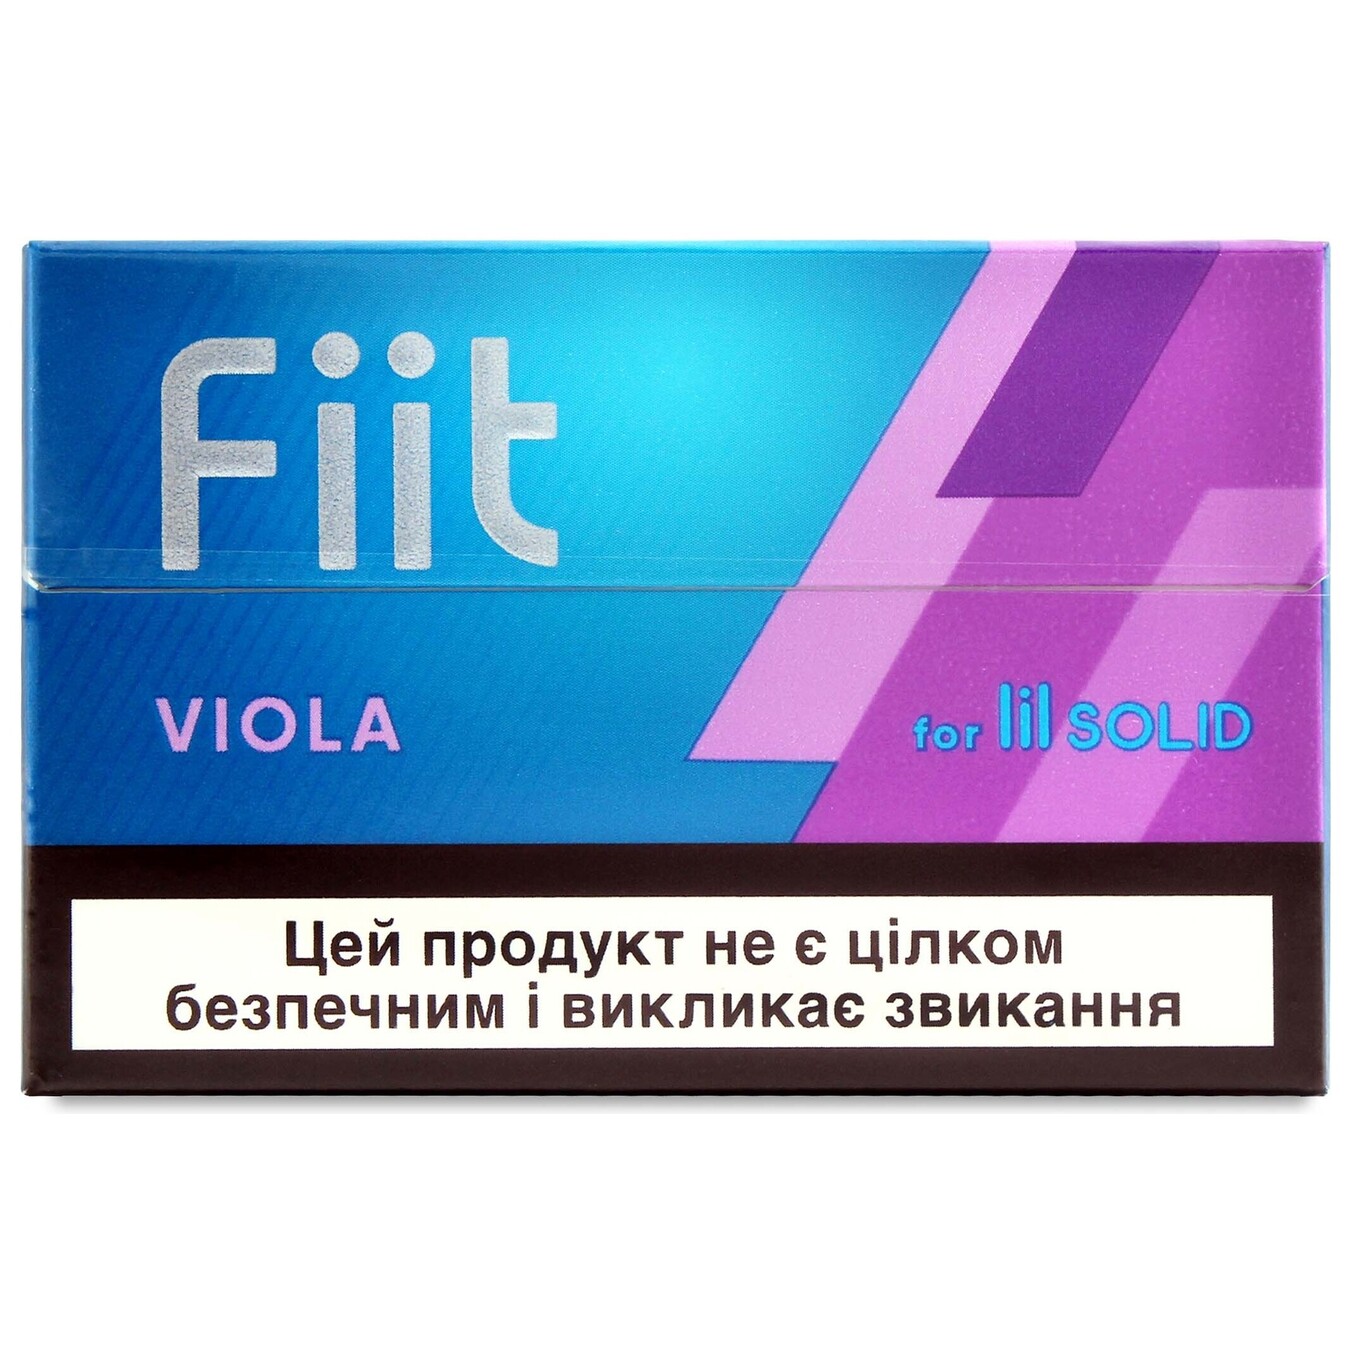 Tobacco Sticks Fiit Viola 20 sticks 5,3g (the price is indicated without excise tax)